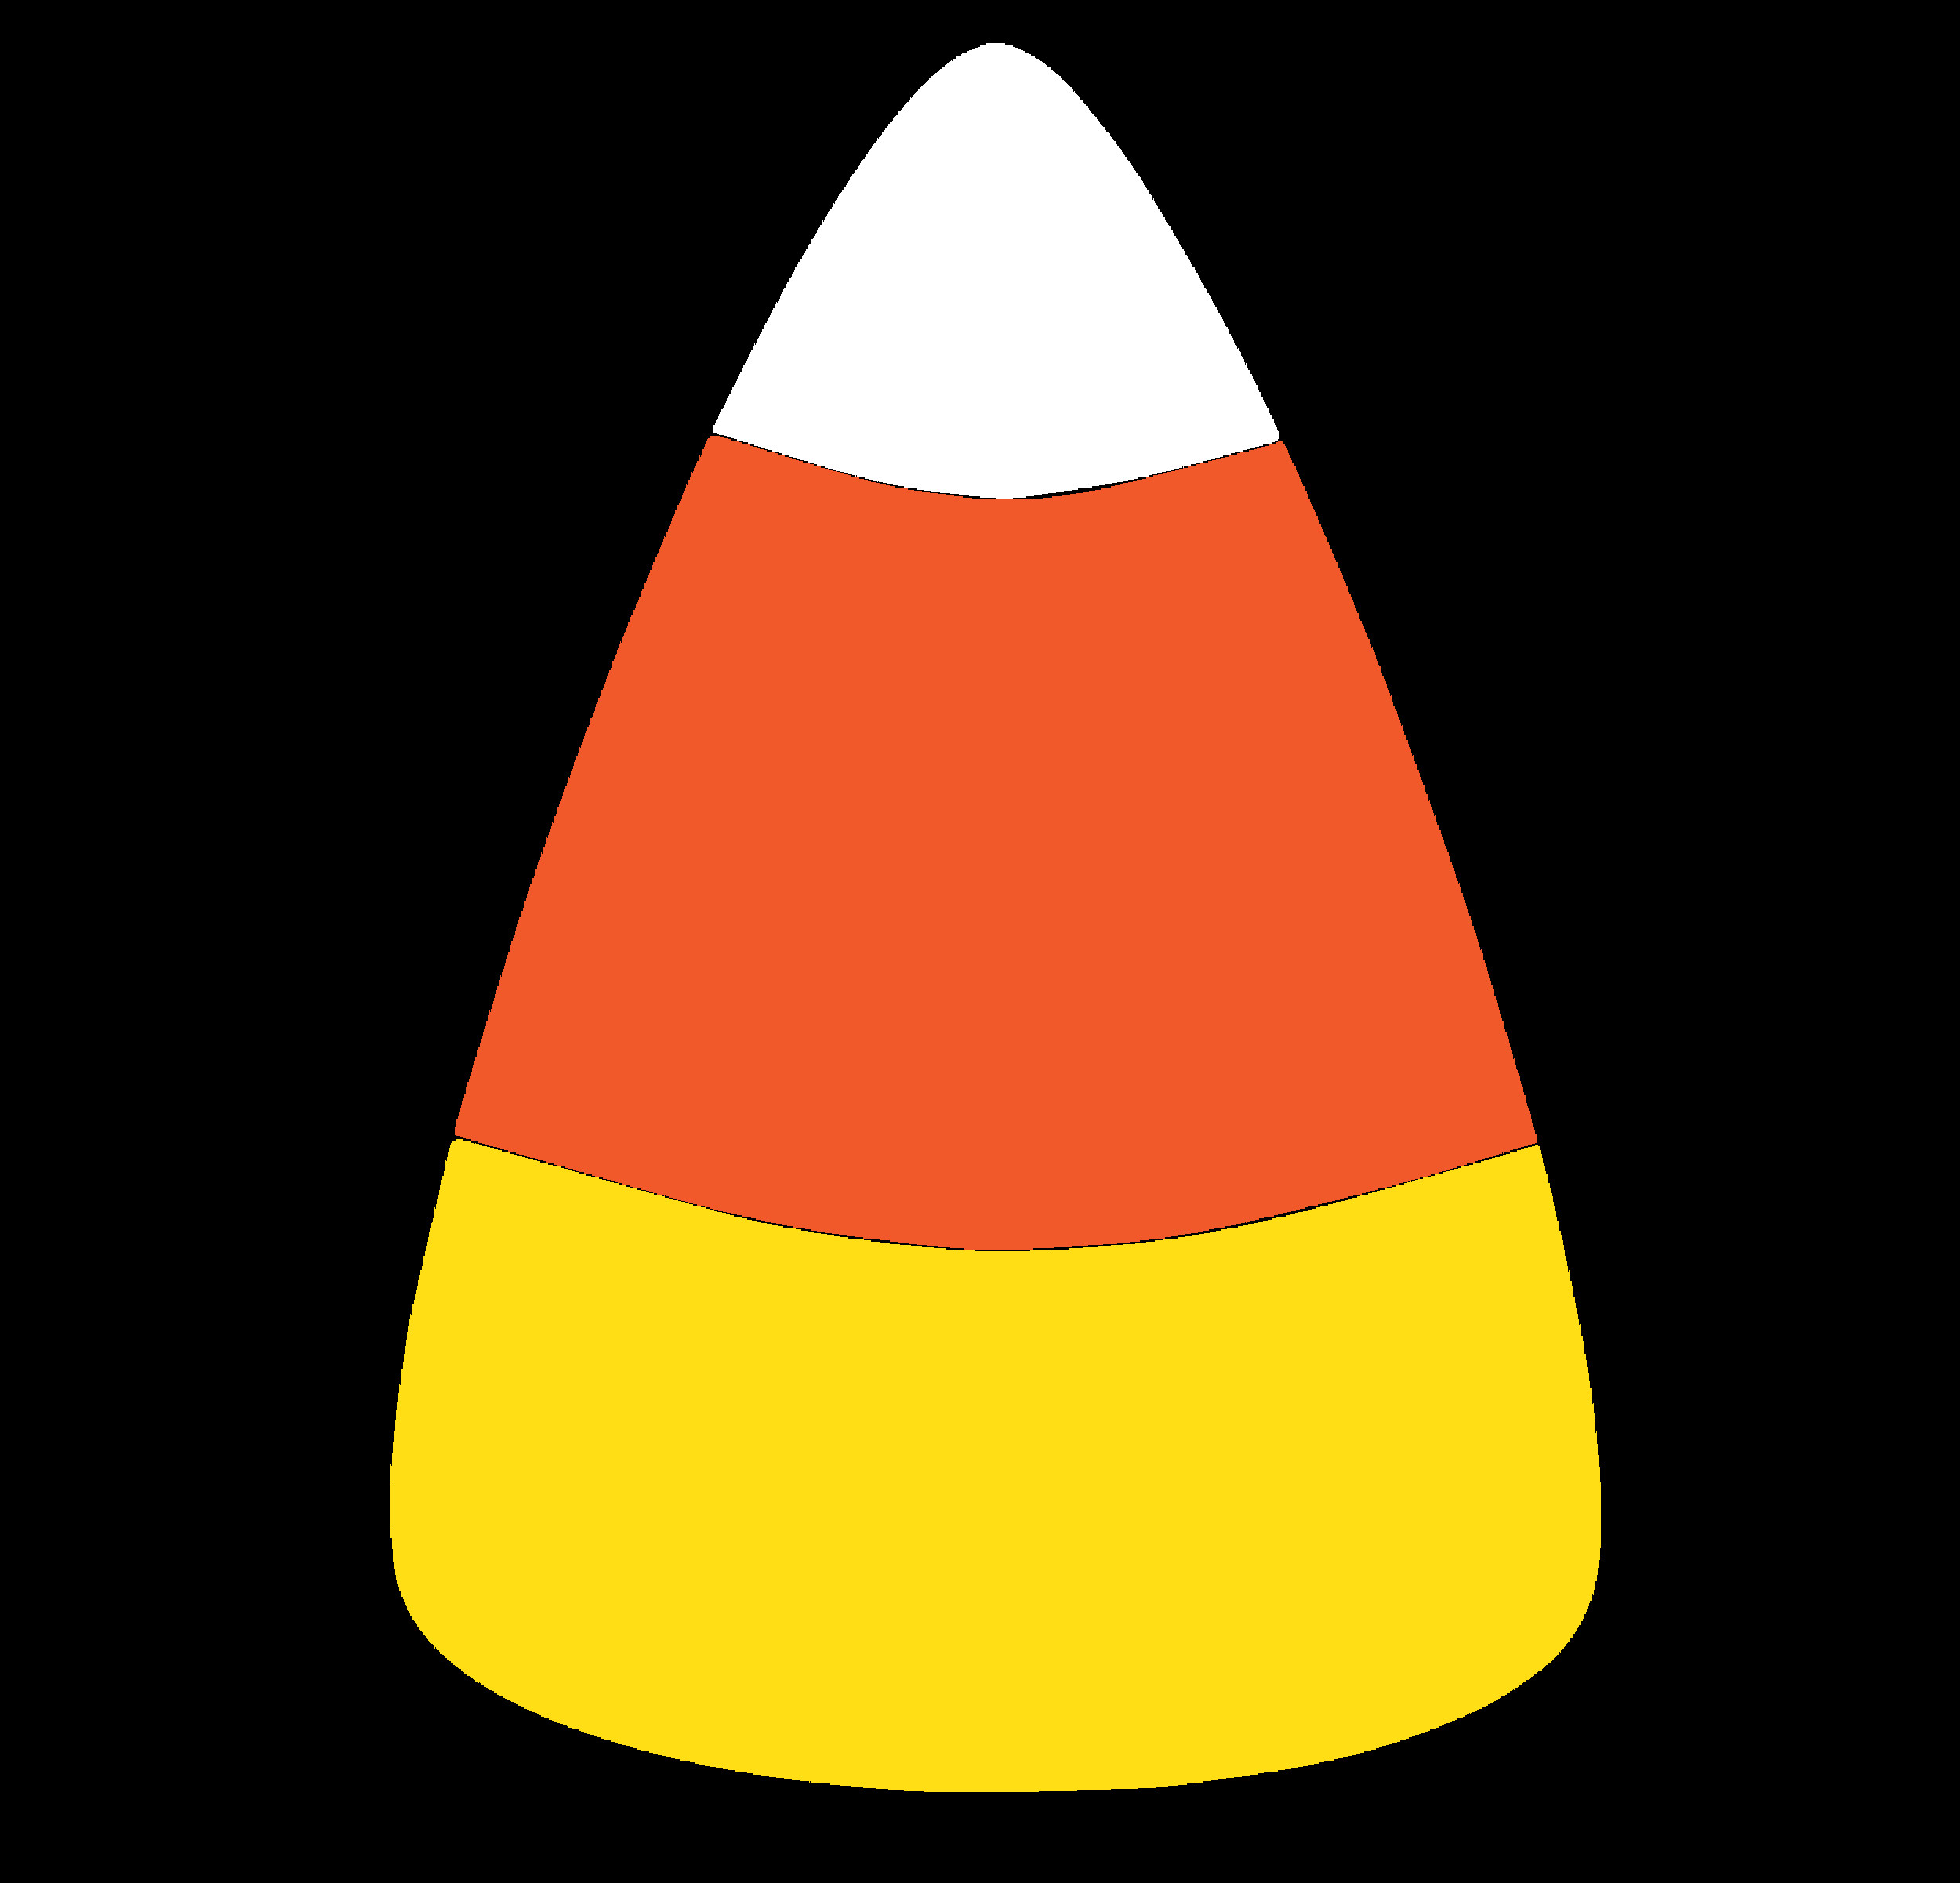 Candy Corn Clipart
 Candy Corn Free Download Clip Art